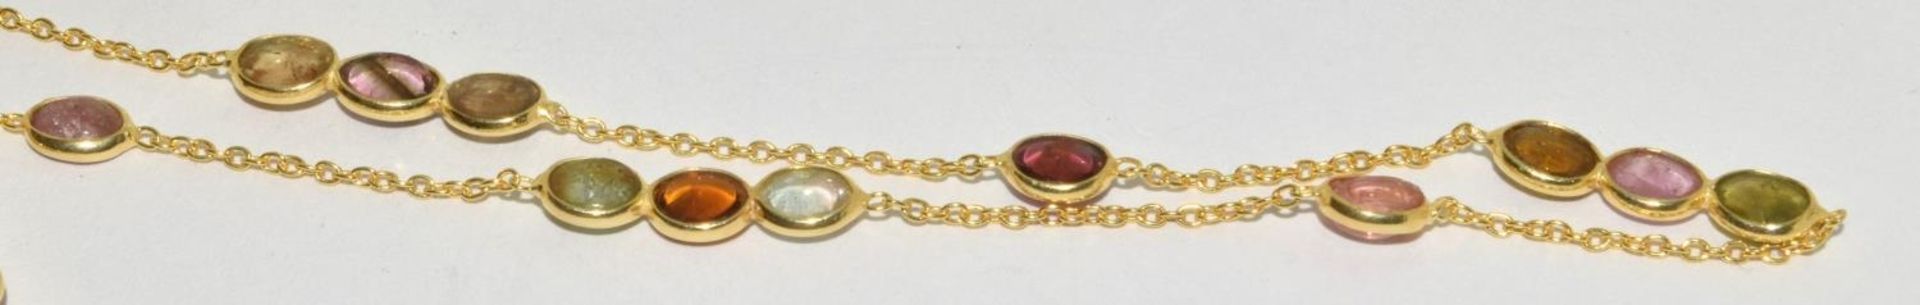 cabochon pink and green natural tourmaline gold on silver on long chain. - Image 3 of 4